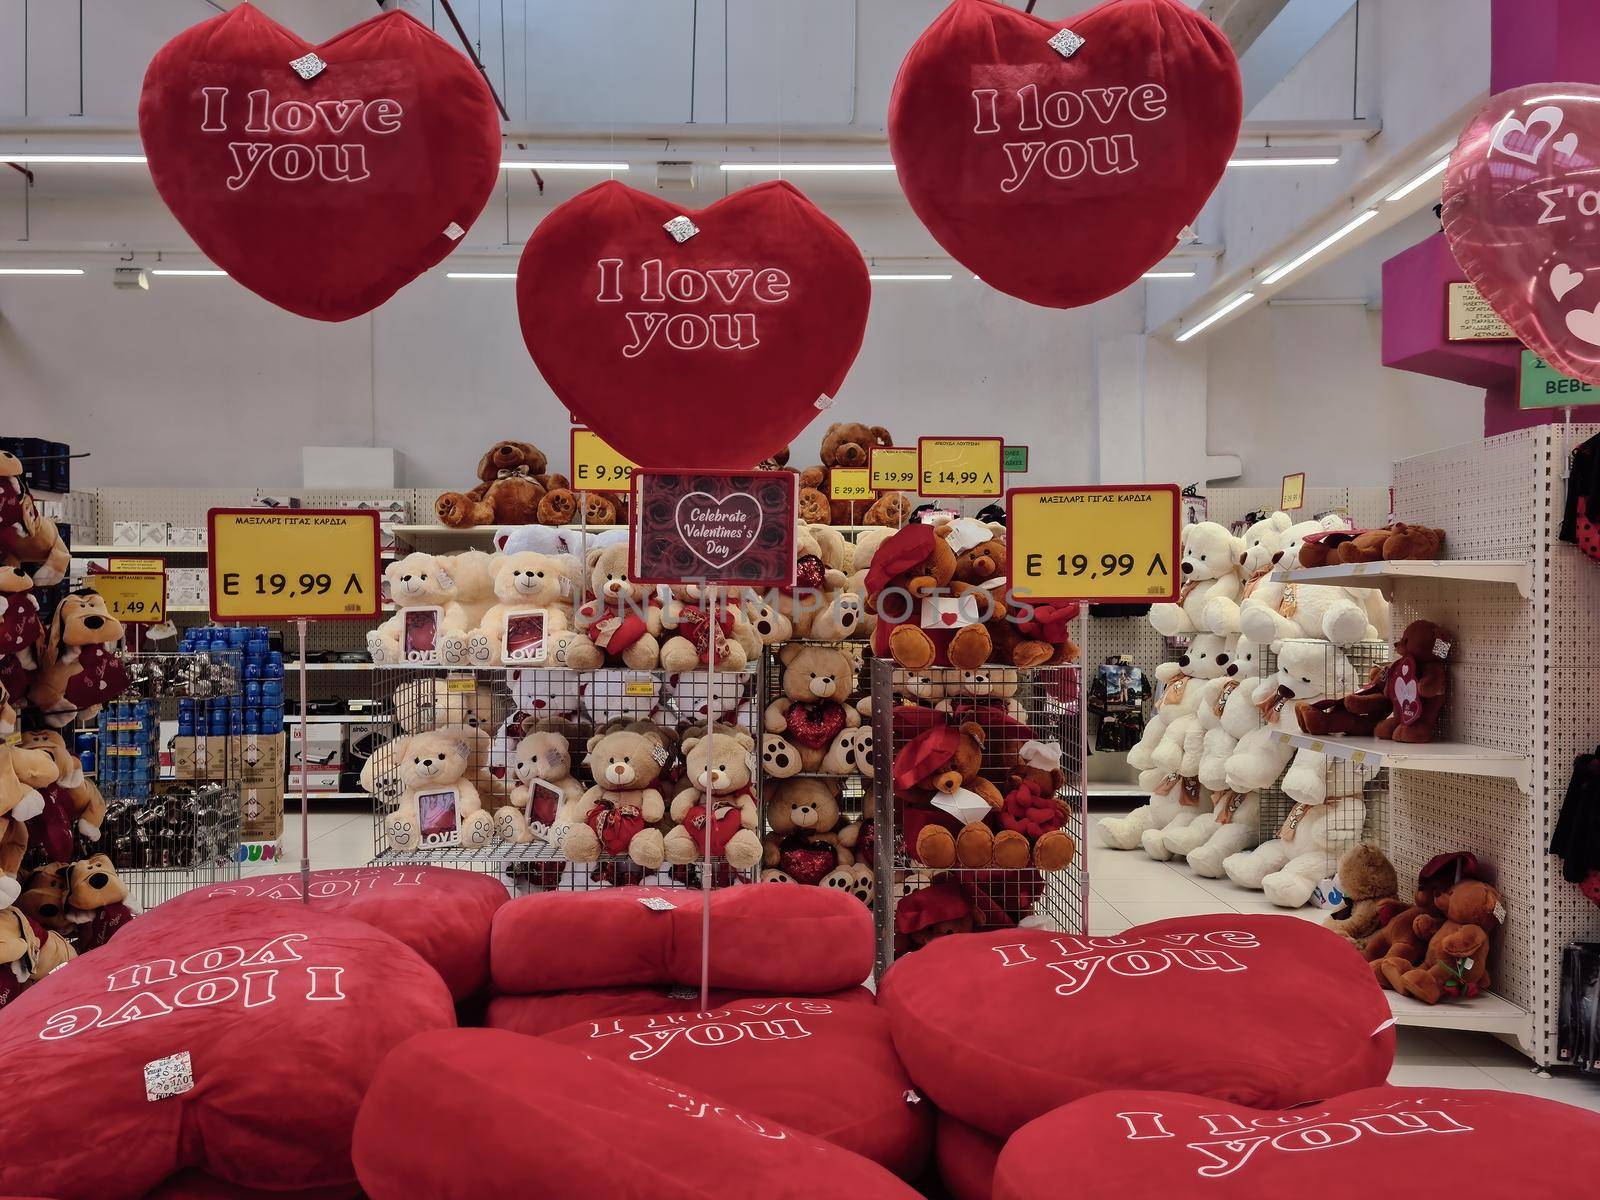 Interior view of romantic love stuffed toys and pillows sold as gifts for annual February 14 feast.